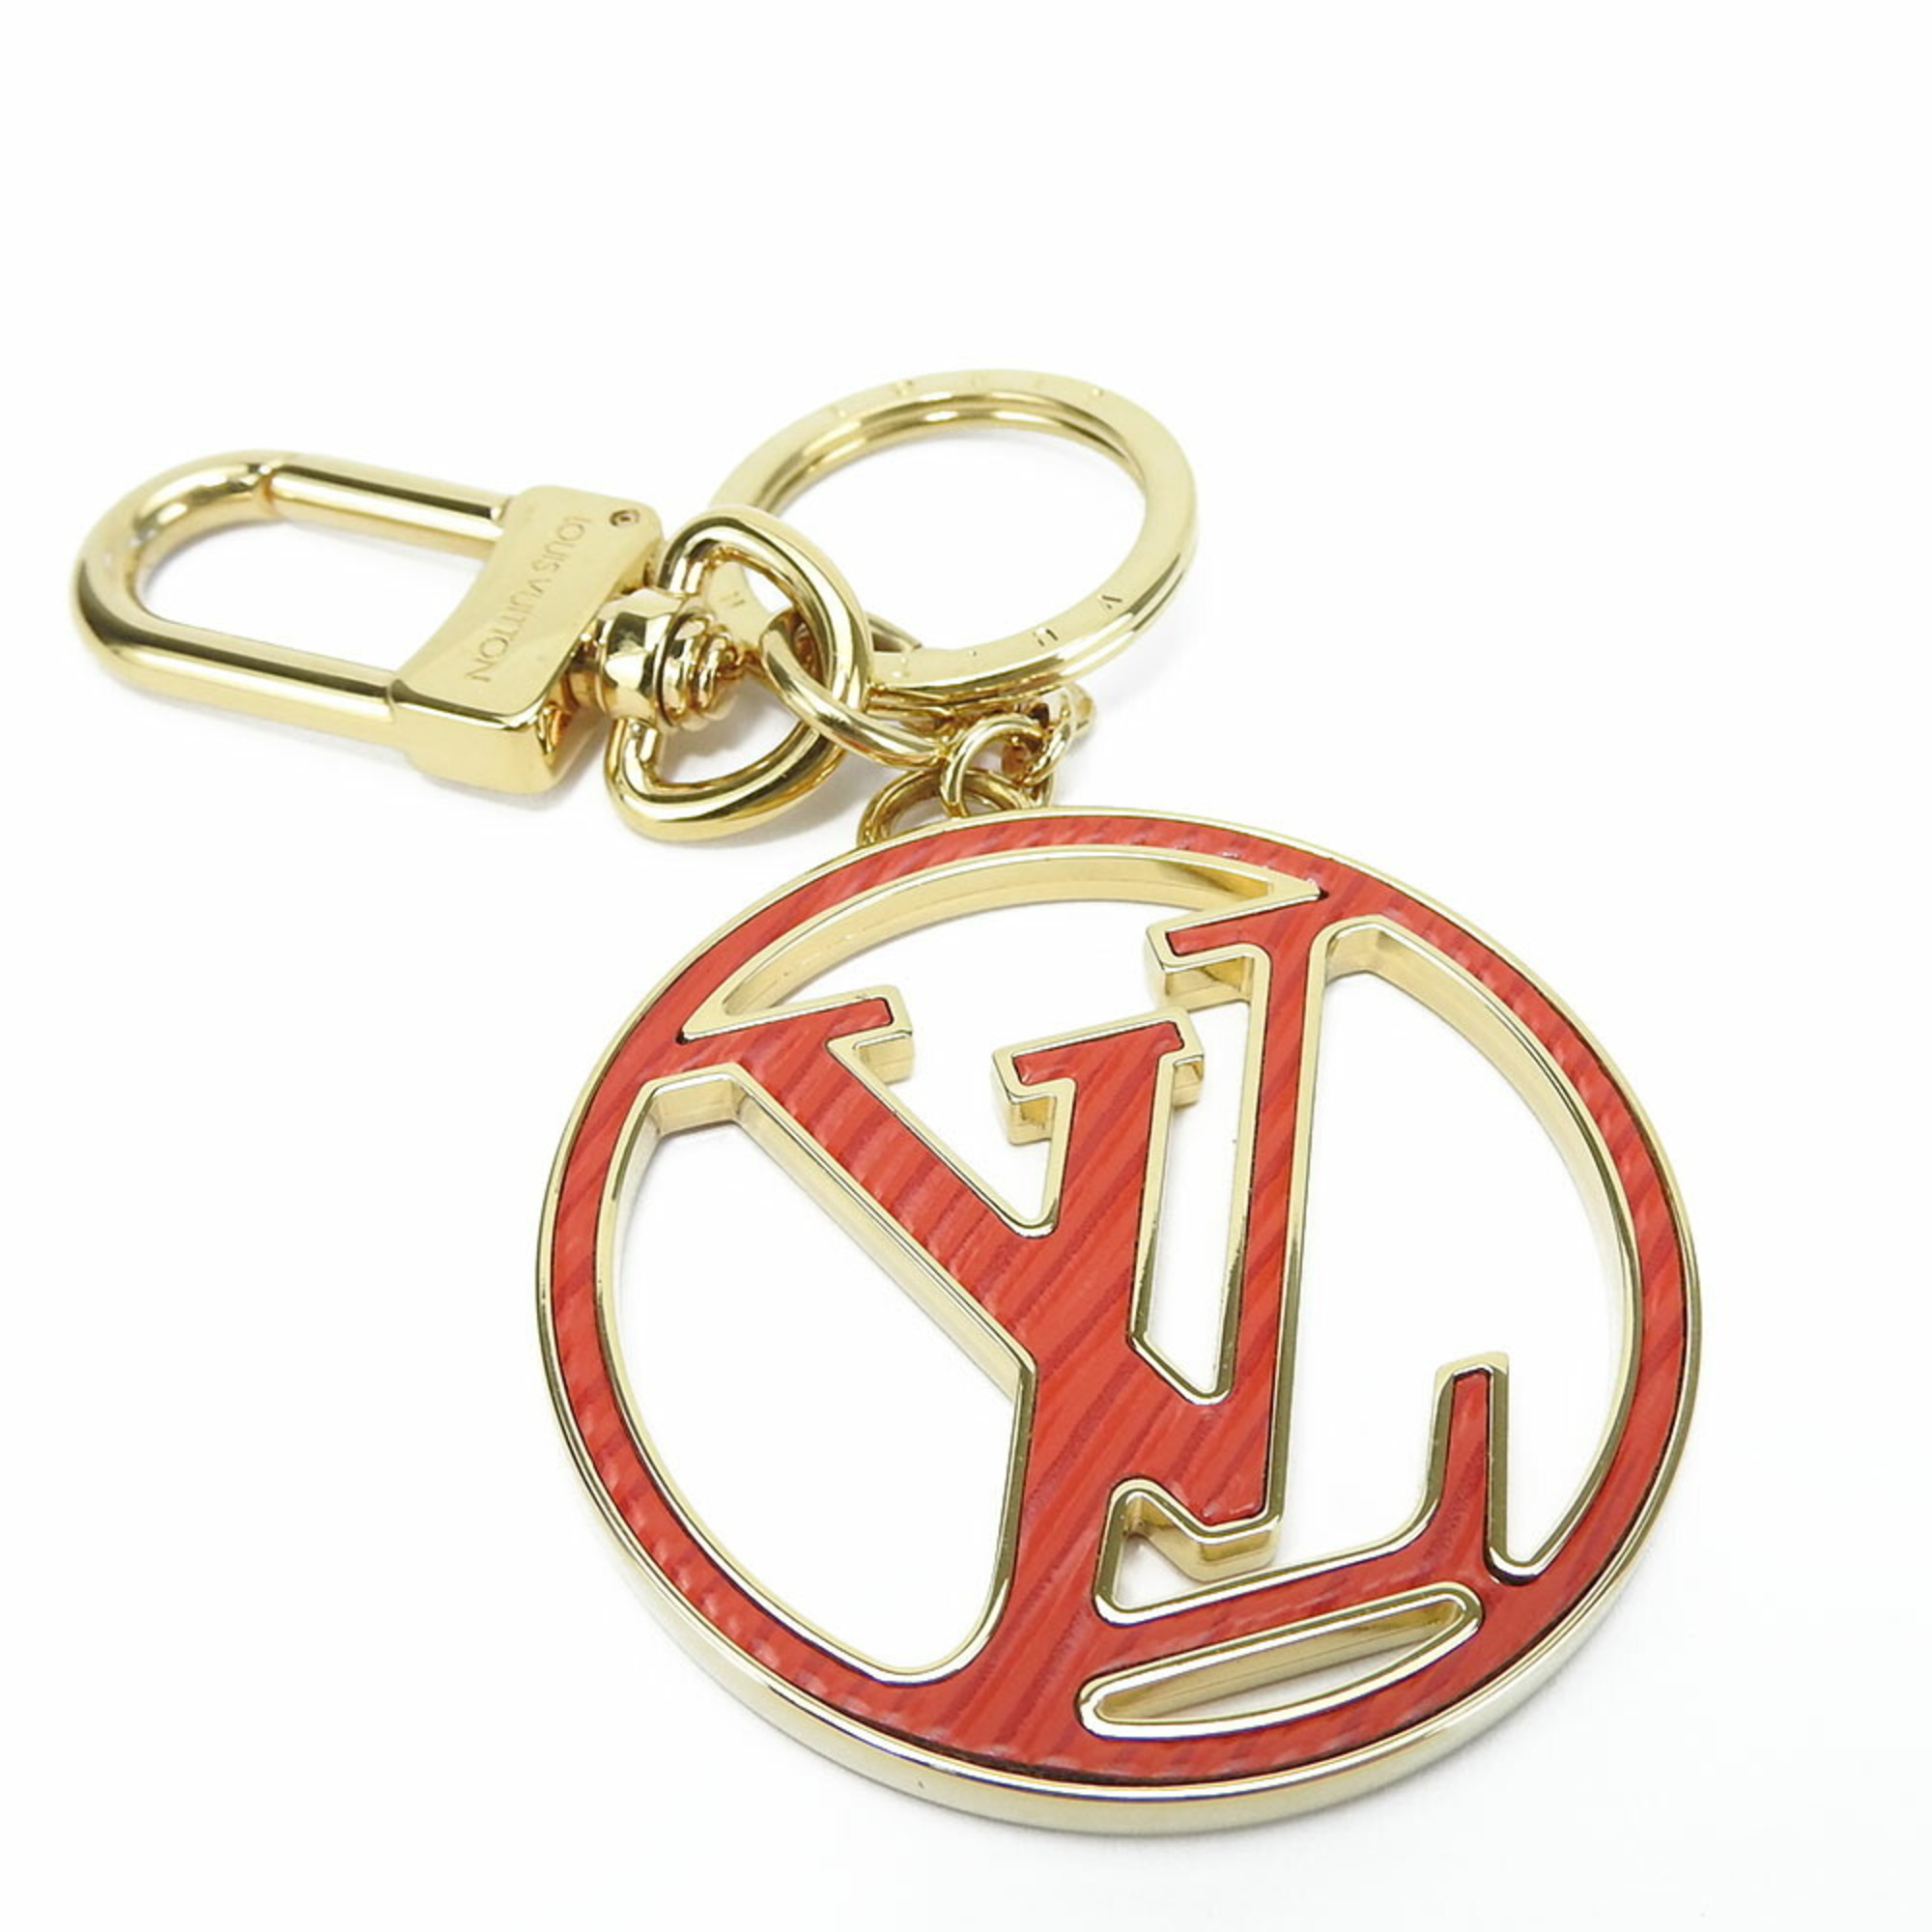 Louis Vuitton Key Ring Portocre LV Circle Keychain M68465 Metal Epi Leather Gold Red Pink Bag Charm Accessory Women's LOUIS VUITTON